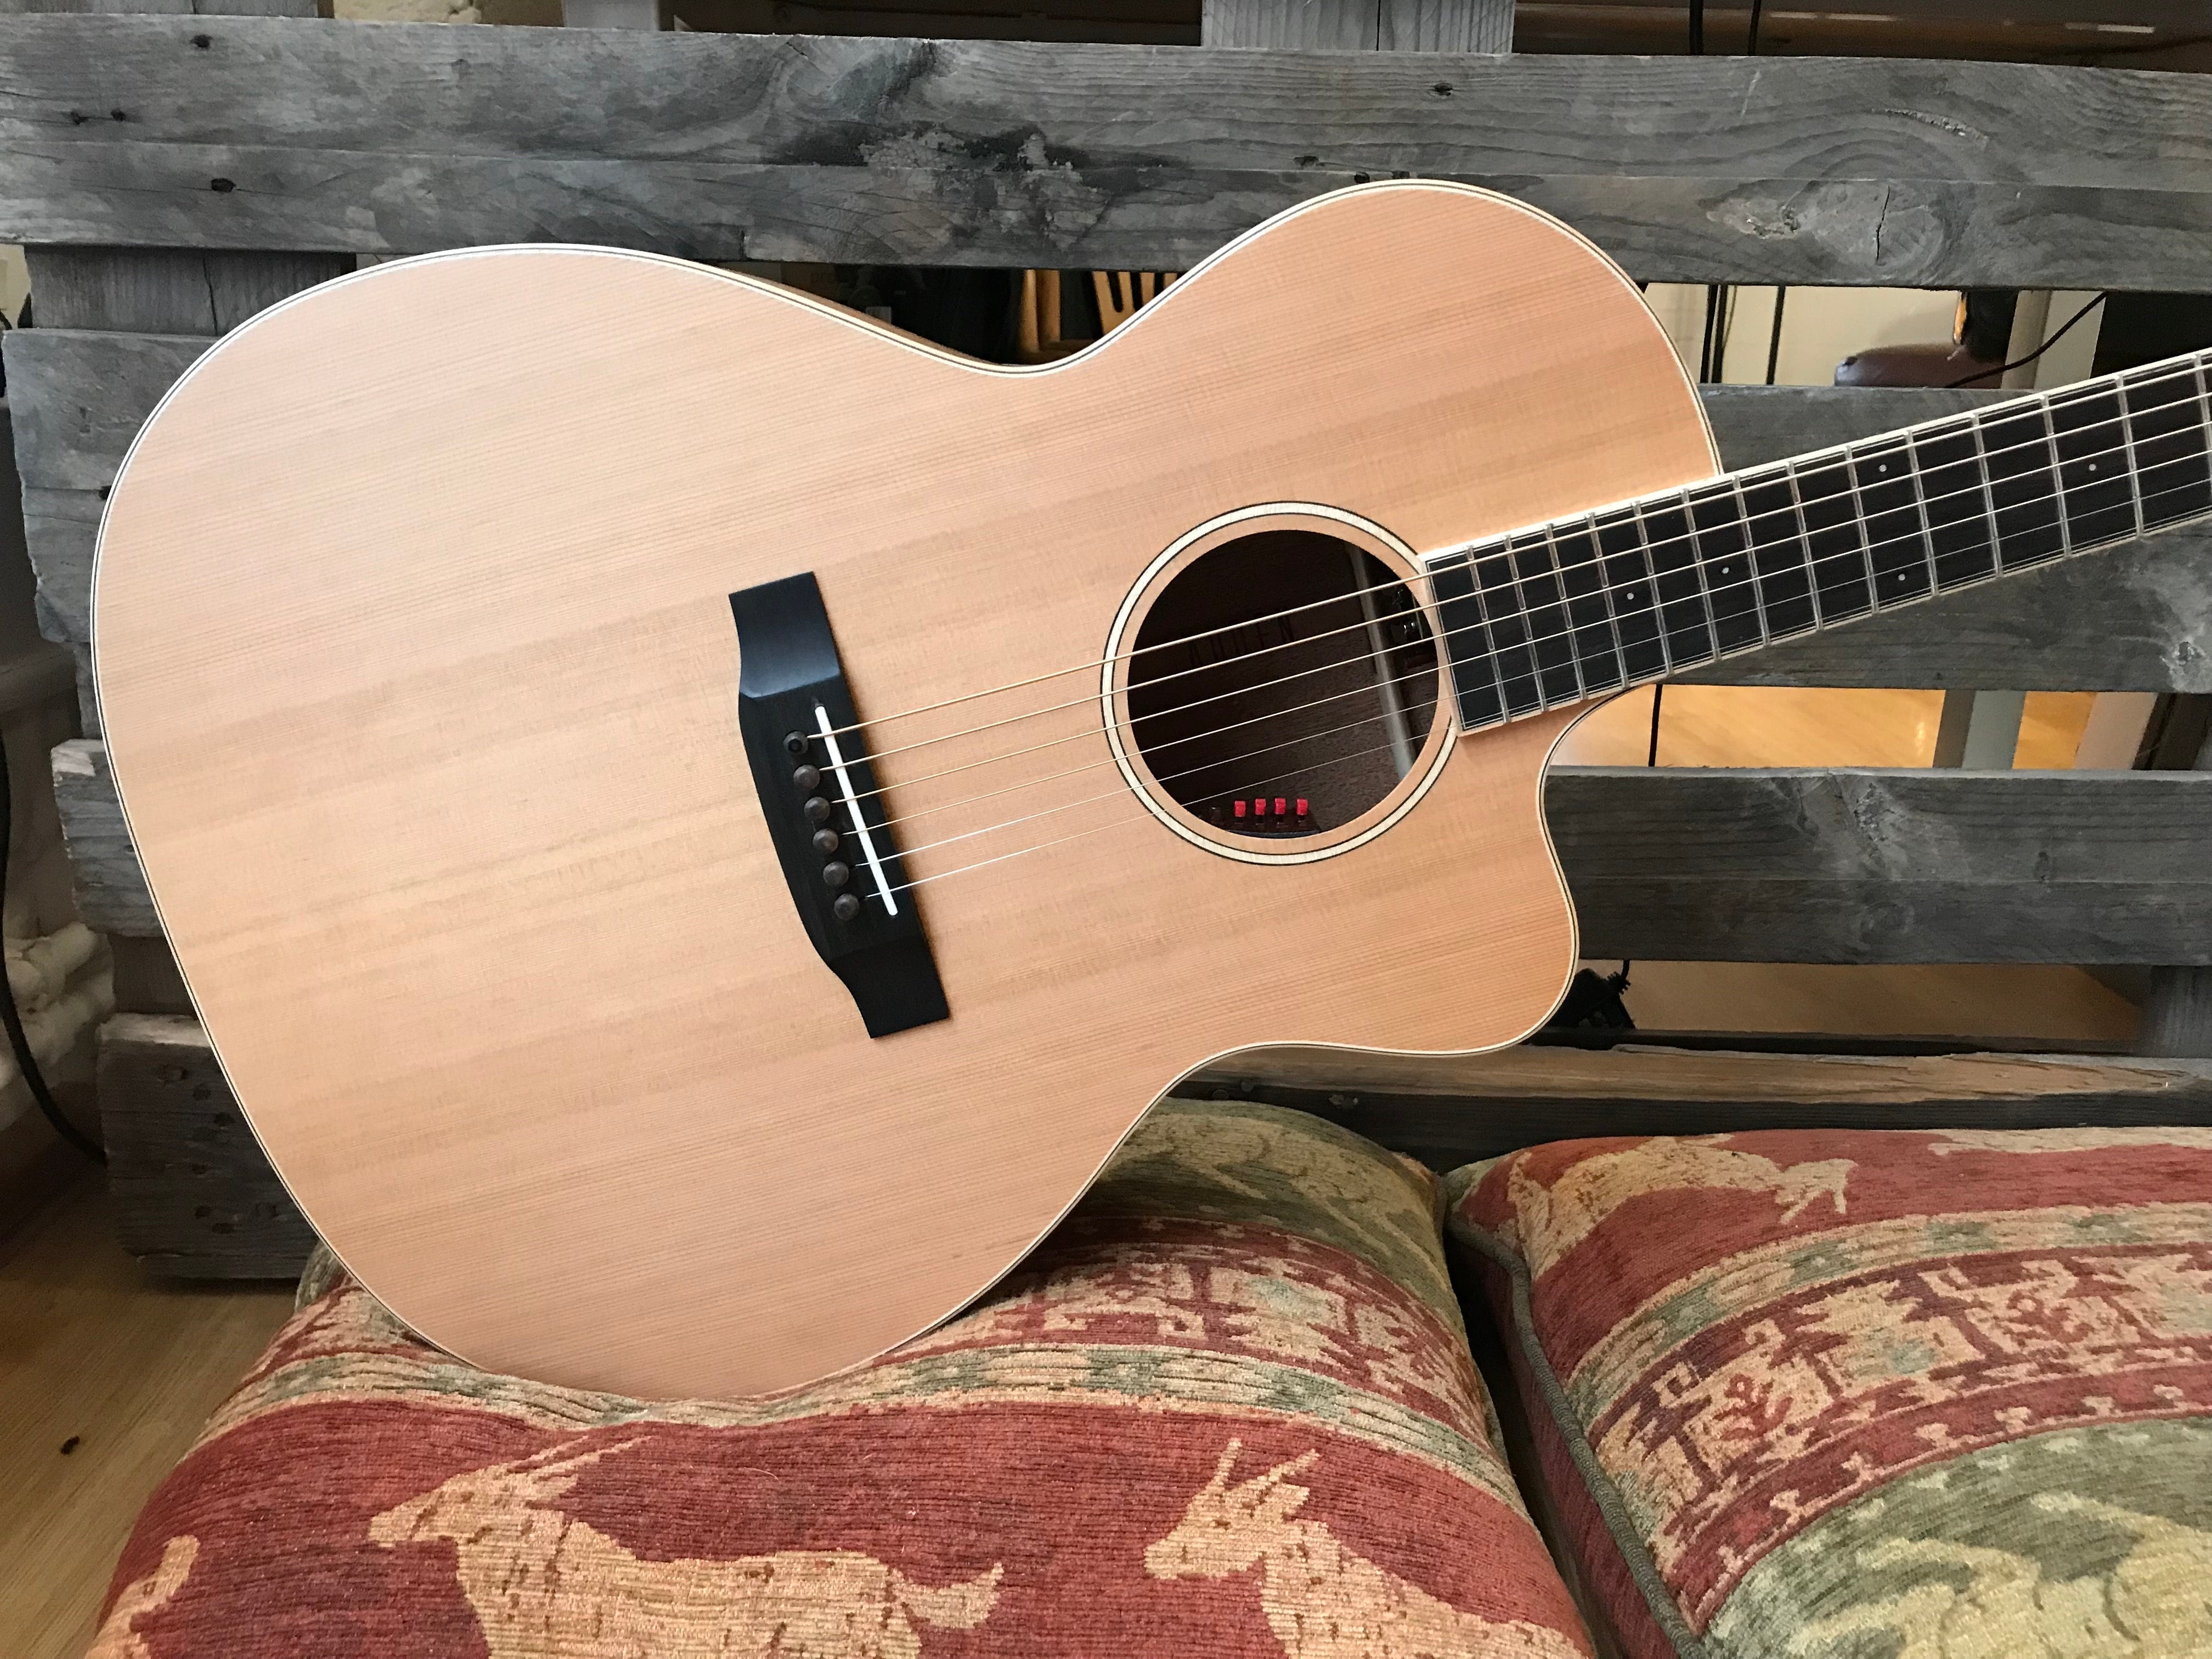 Auden Neo Chester Cutaway., Electro Acoustic Guitar for sale at Richards Guitars.